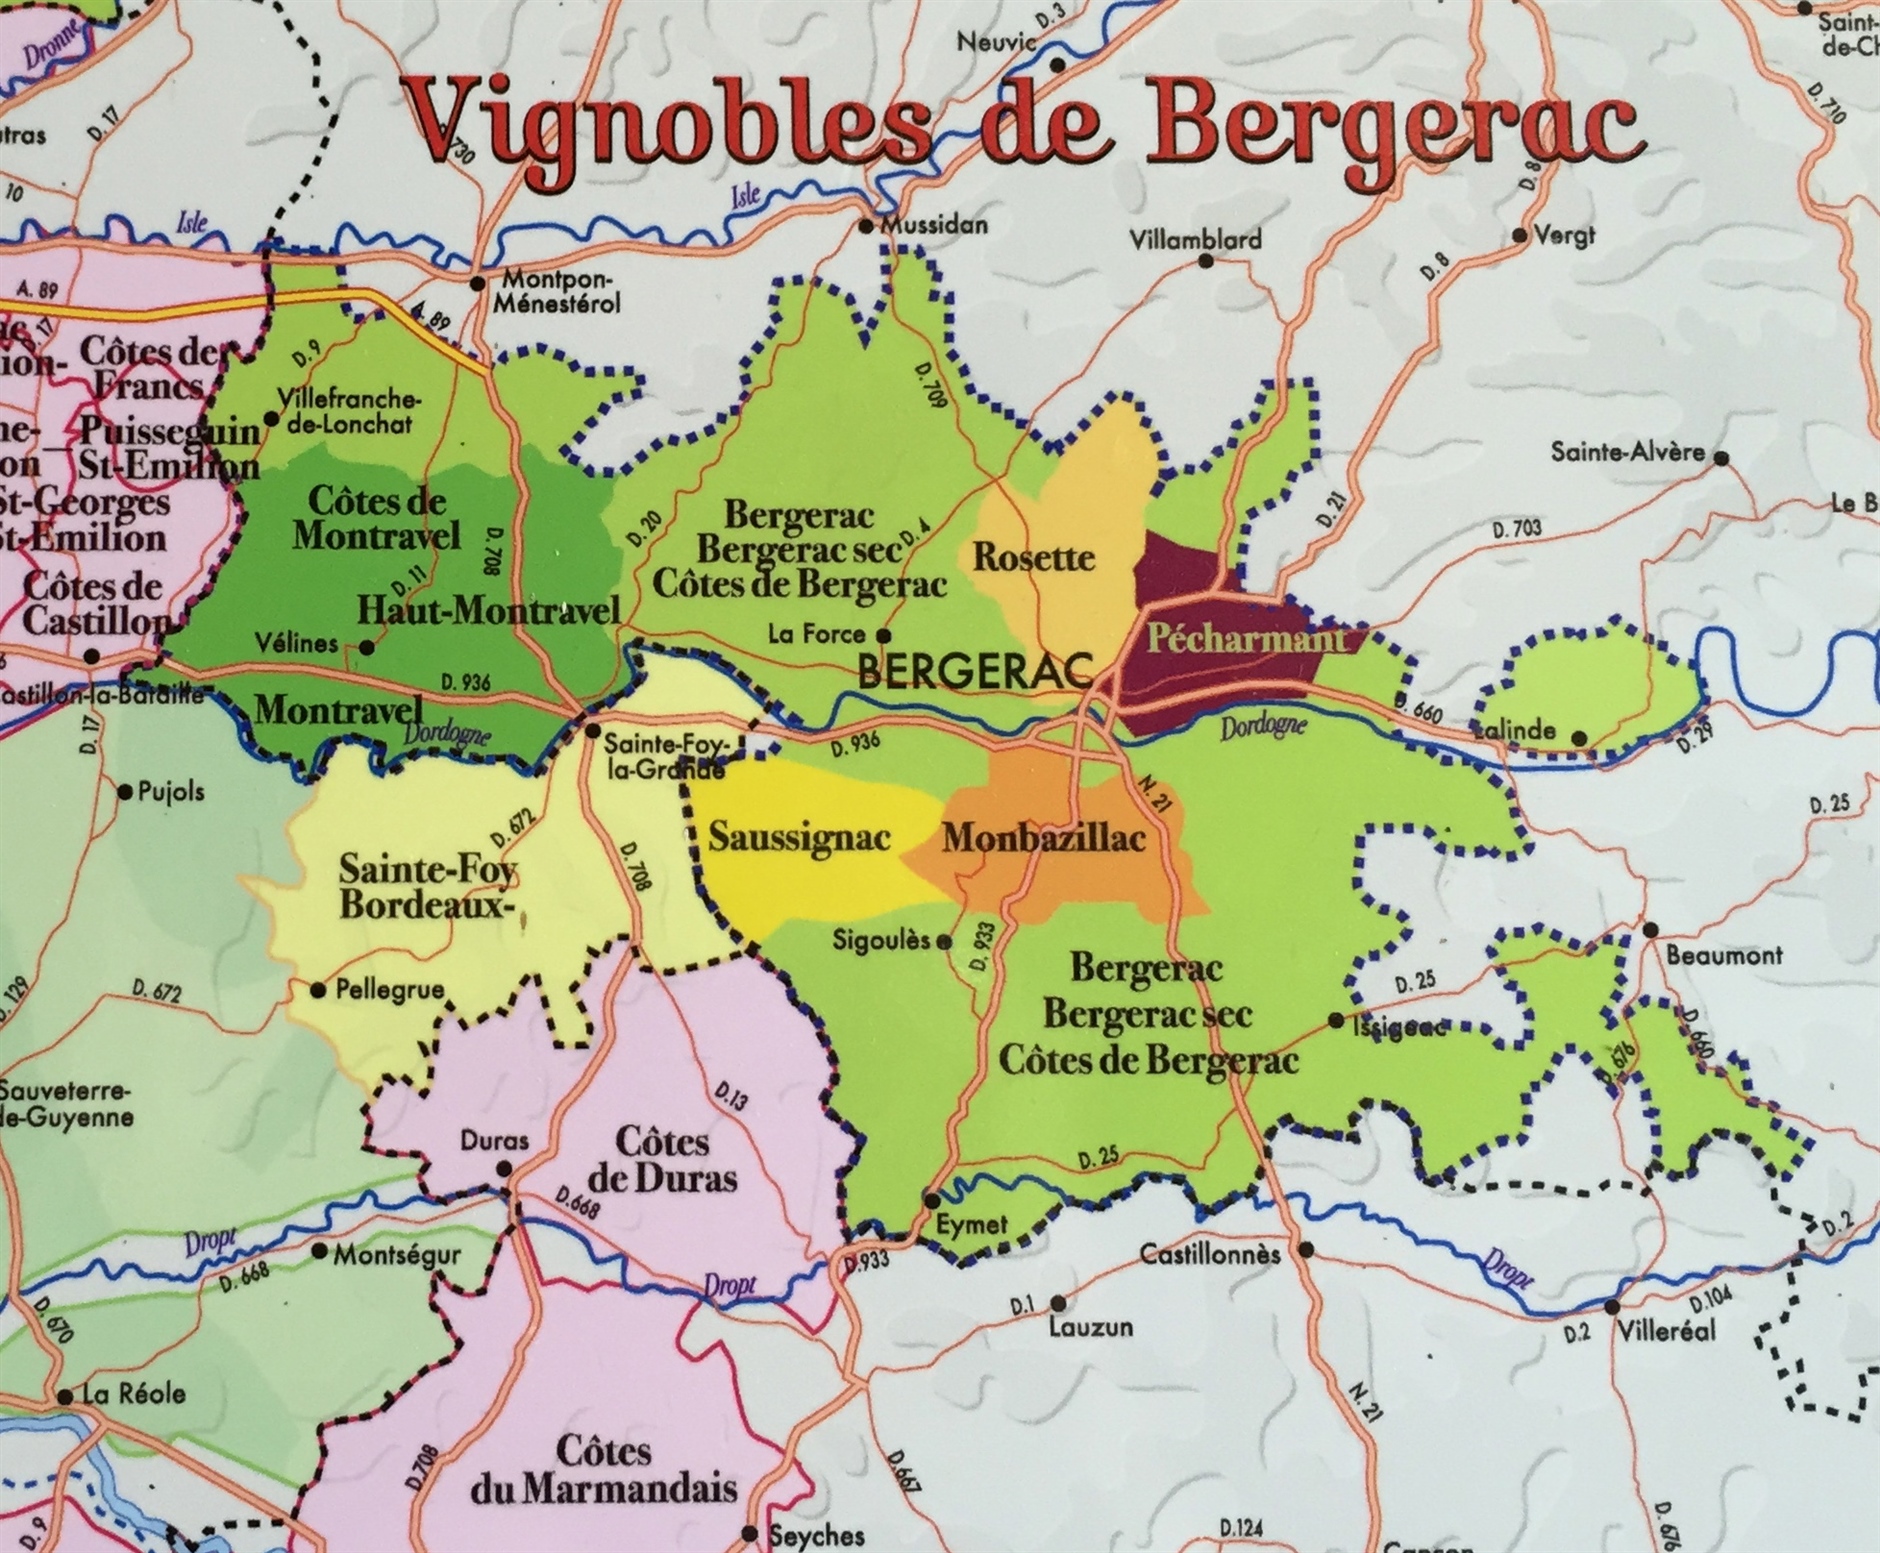 International Bergerac Gascony Articles From GuildSomm - Satellites: Beyond - Neal to Feature Charles Bordeaux -